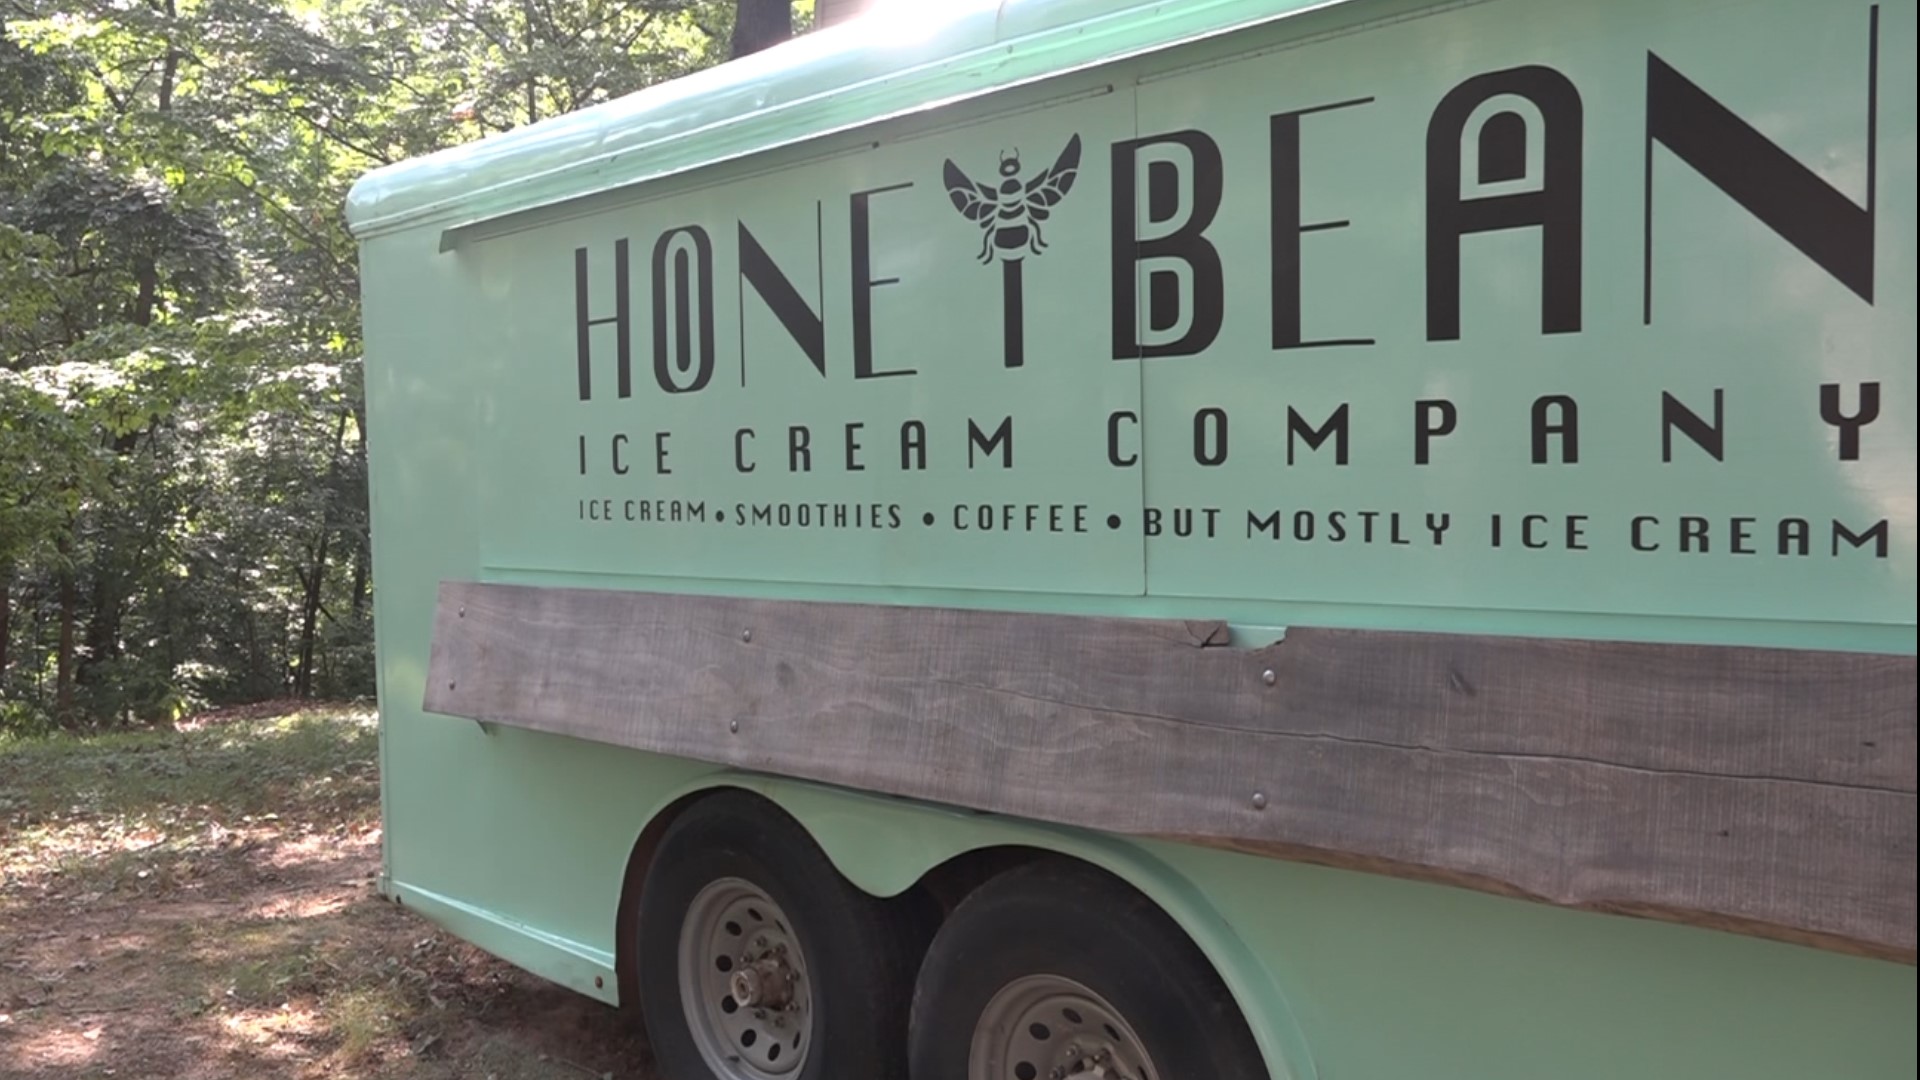 Honeybee Ice Cream Company is a new business that started with a childhood dream. Check out how a refurbished food truck helped make their dream a reality.